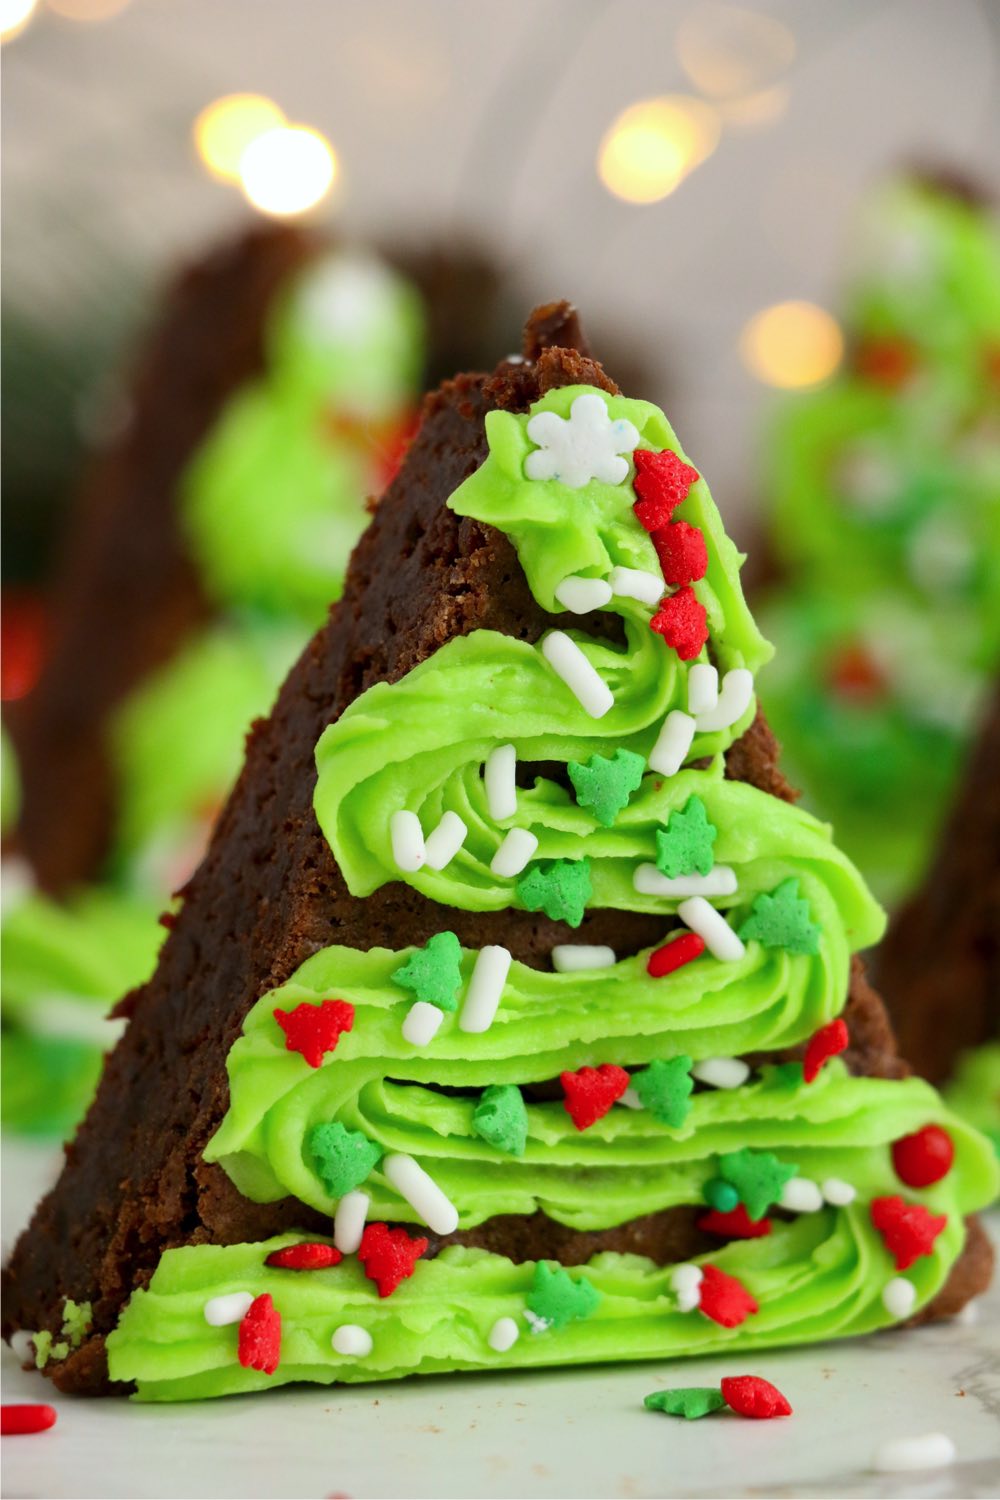 triangle brownies decorated like Christmas trees